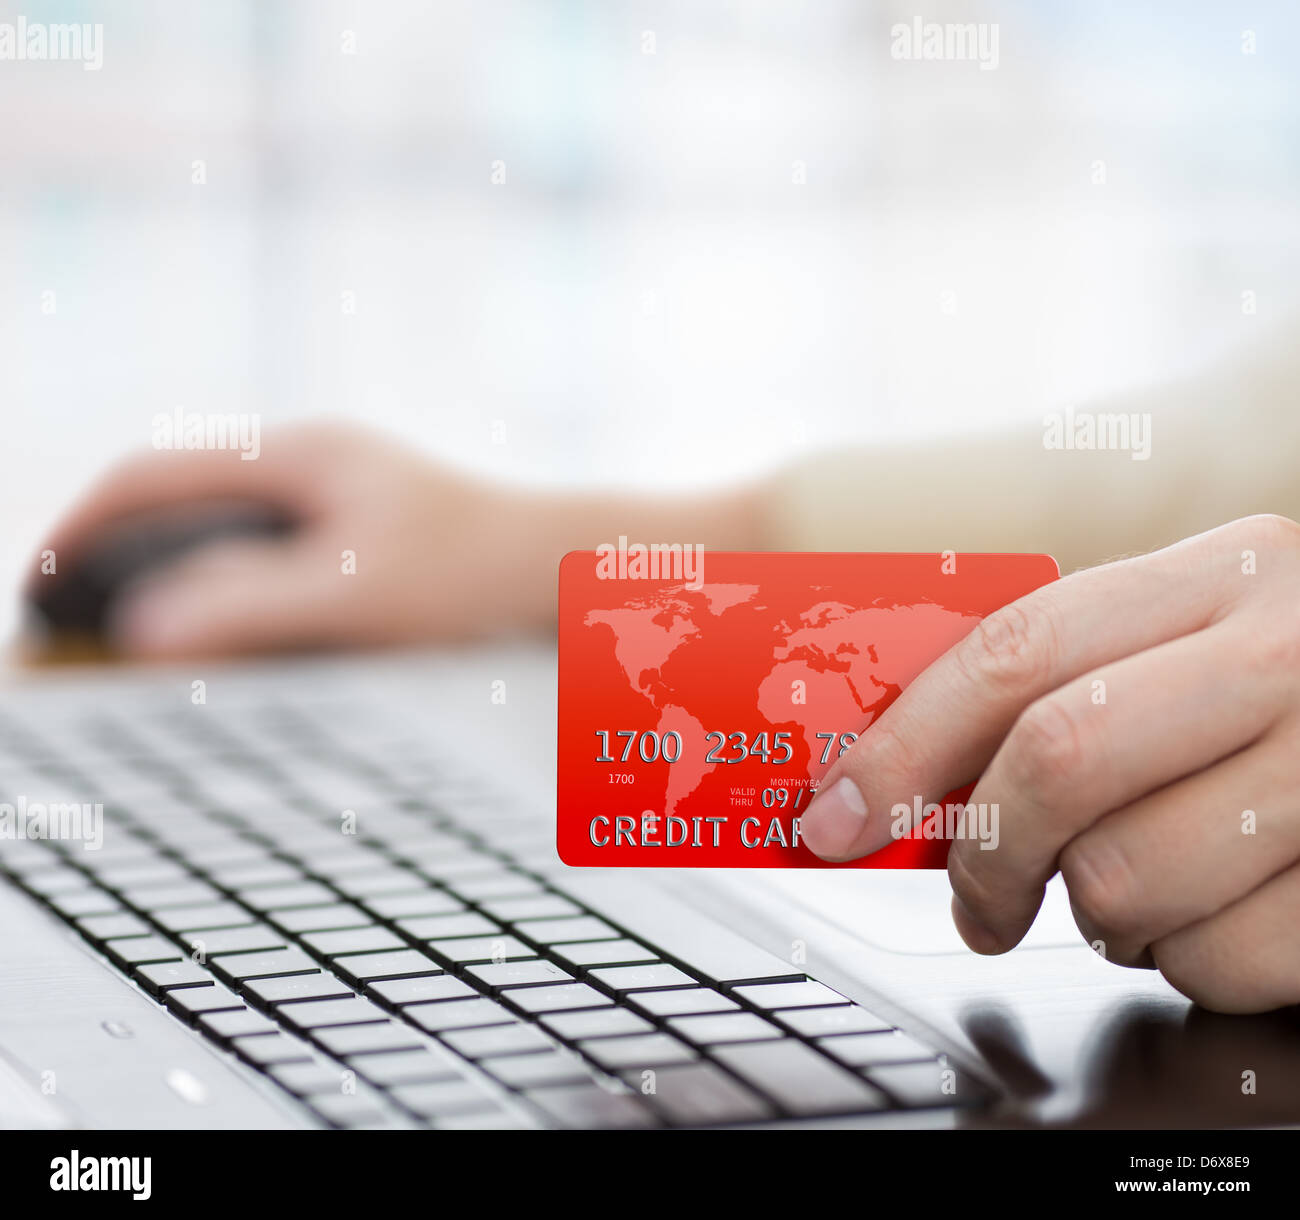 credit card security code entering for online e-commerce Stock Photo